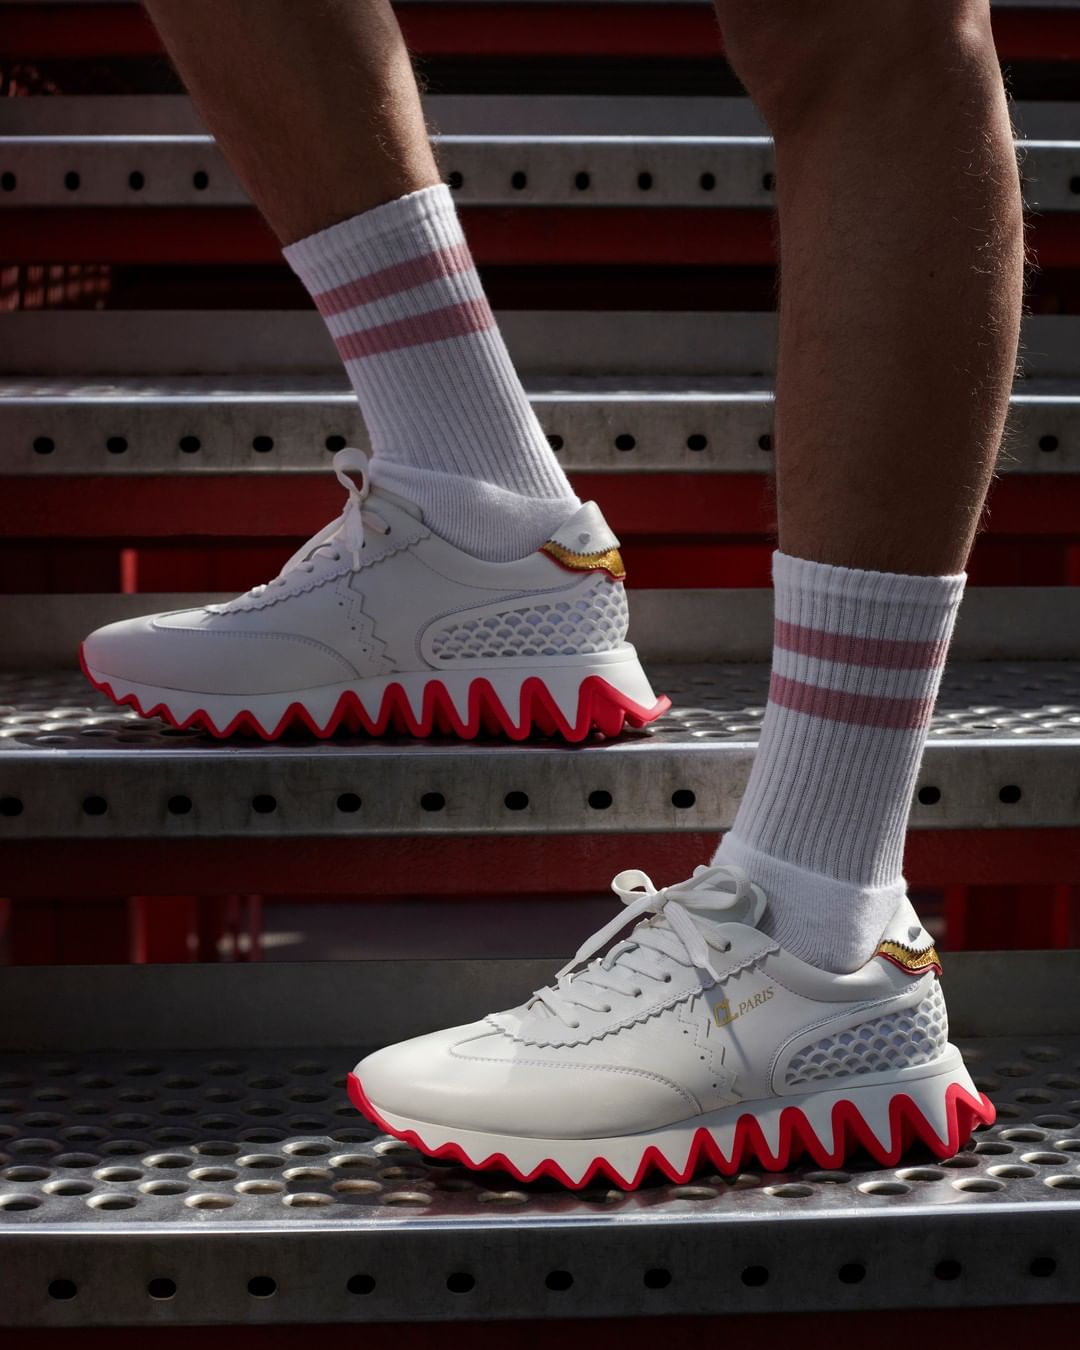 Christian Louboutin - #ChristianLouboutin's new #Loubishark sneaker: Stay jaw-some! 
Photo by @Felix_Cooper